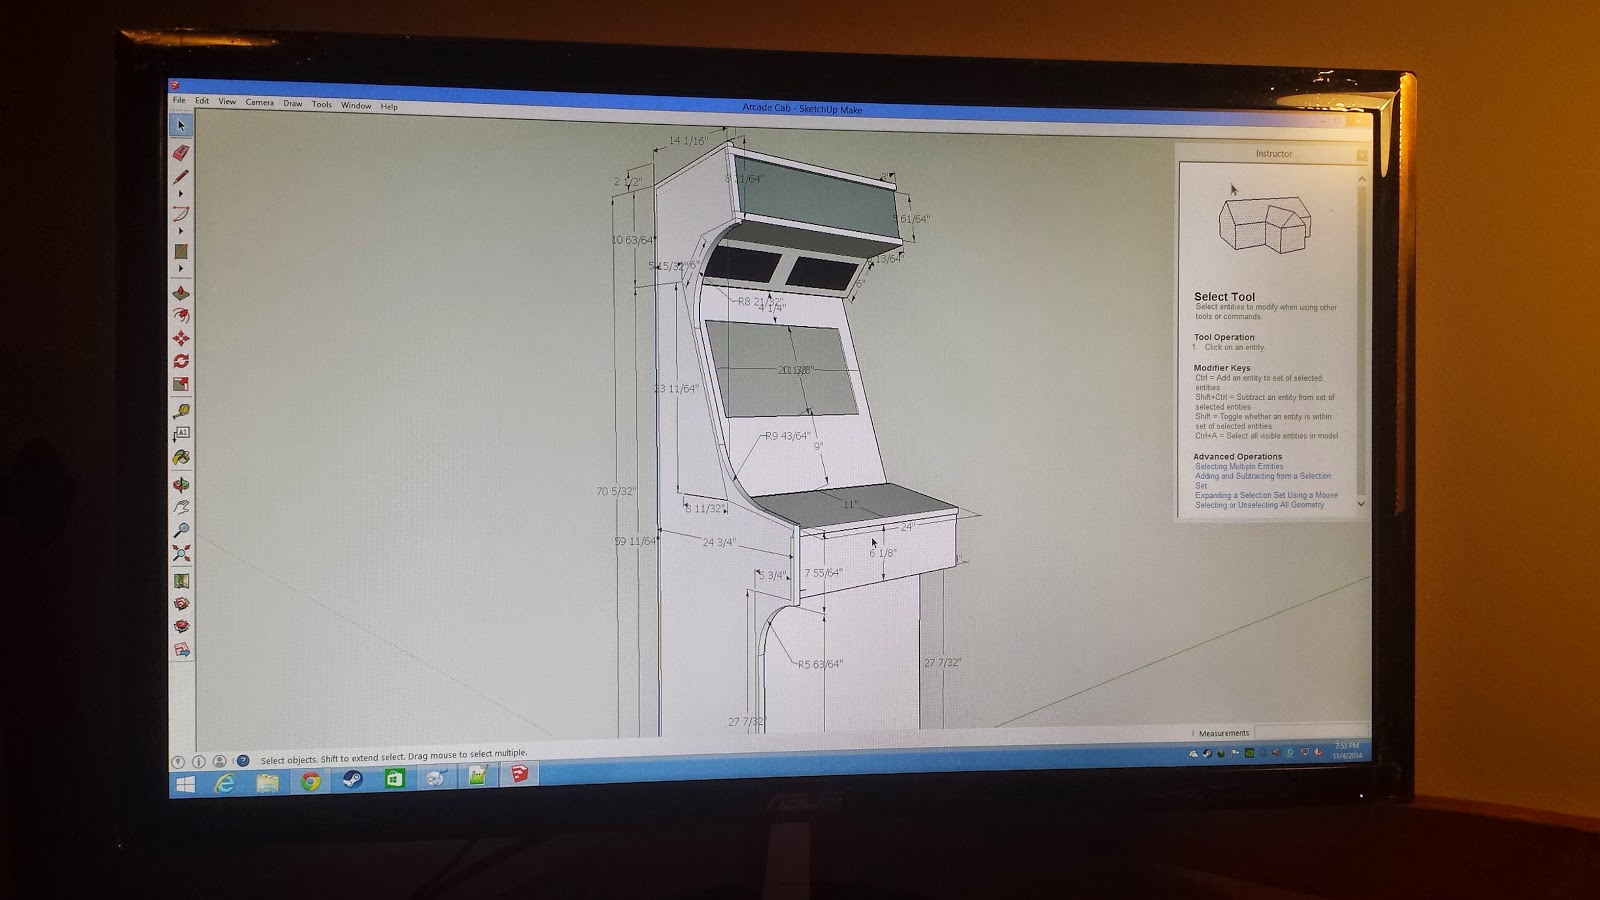 Photo of a computer monitor, showing an arcade cabinet being designed in Google SketchUp